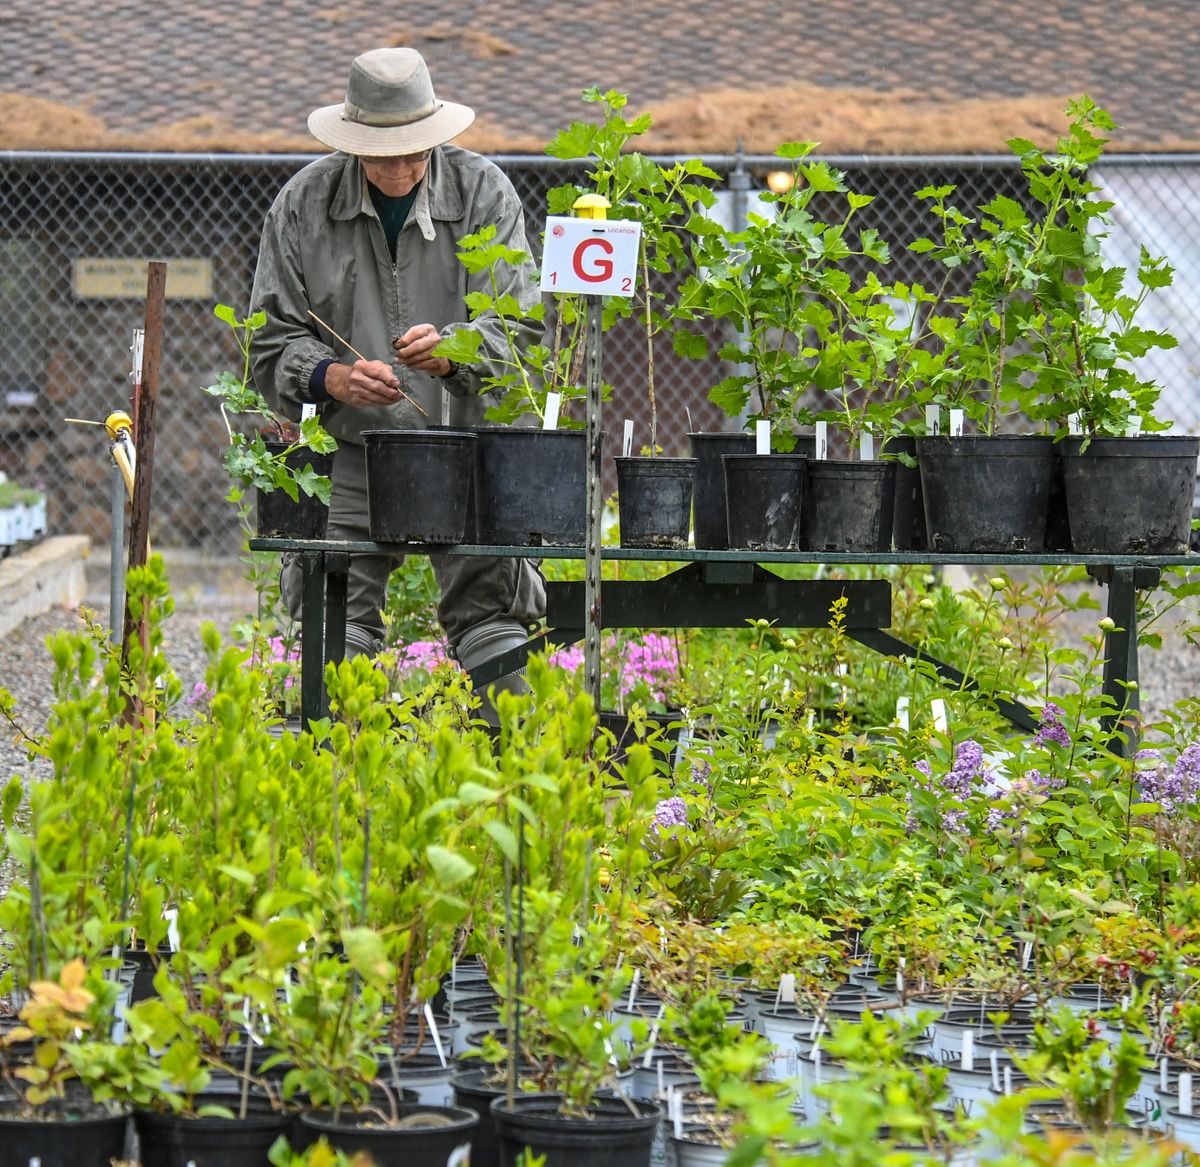 Greg Taylor works with jostaberry plants, which are a cross between a gooseberry and blackcurrant plant, during preparations Wednesday, May 19, 2021, for the Friends of Manito Plant Sale in June.  (Dan Pelle/The Spokesman-Review)